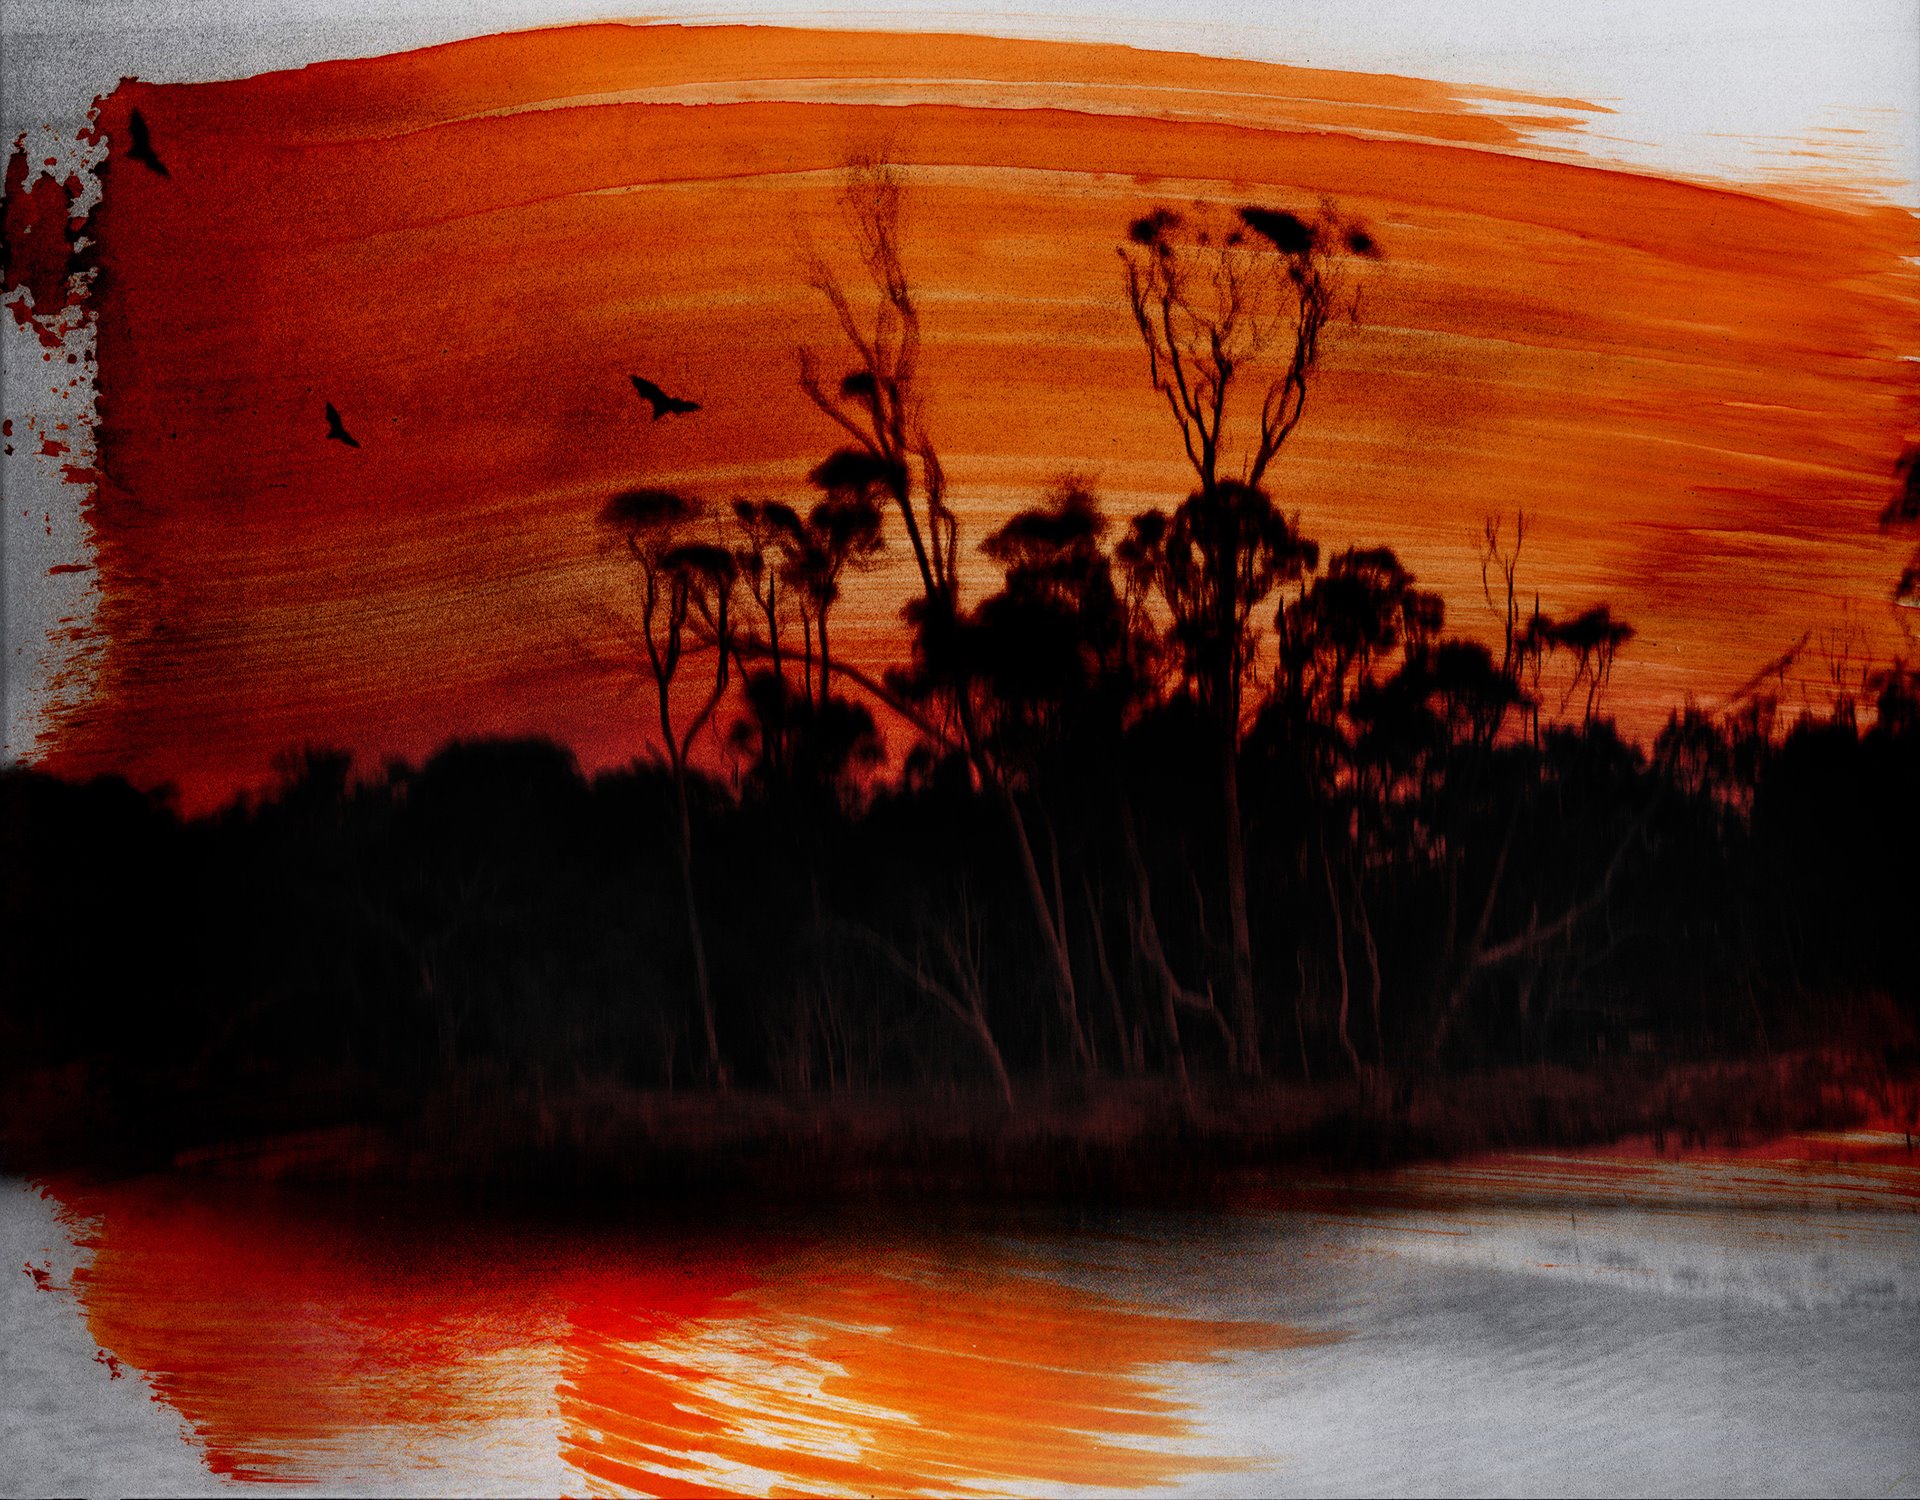 Callala Creek (Jerrinja and Wandi Wandian Country) near the photographer&rsquo;s family home. The photograph was hand printed in the darkroom by the photographer and then painted with ink.